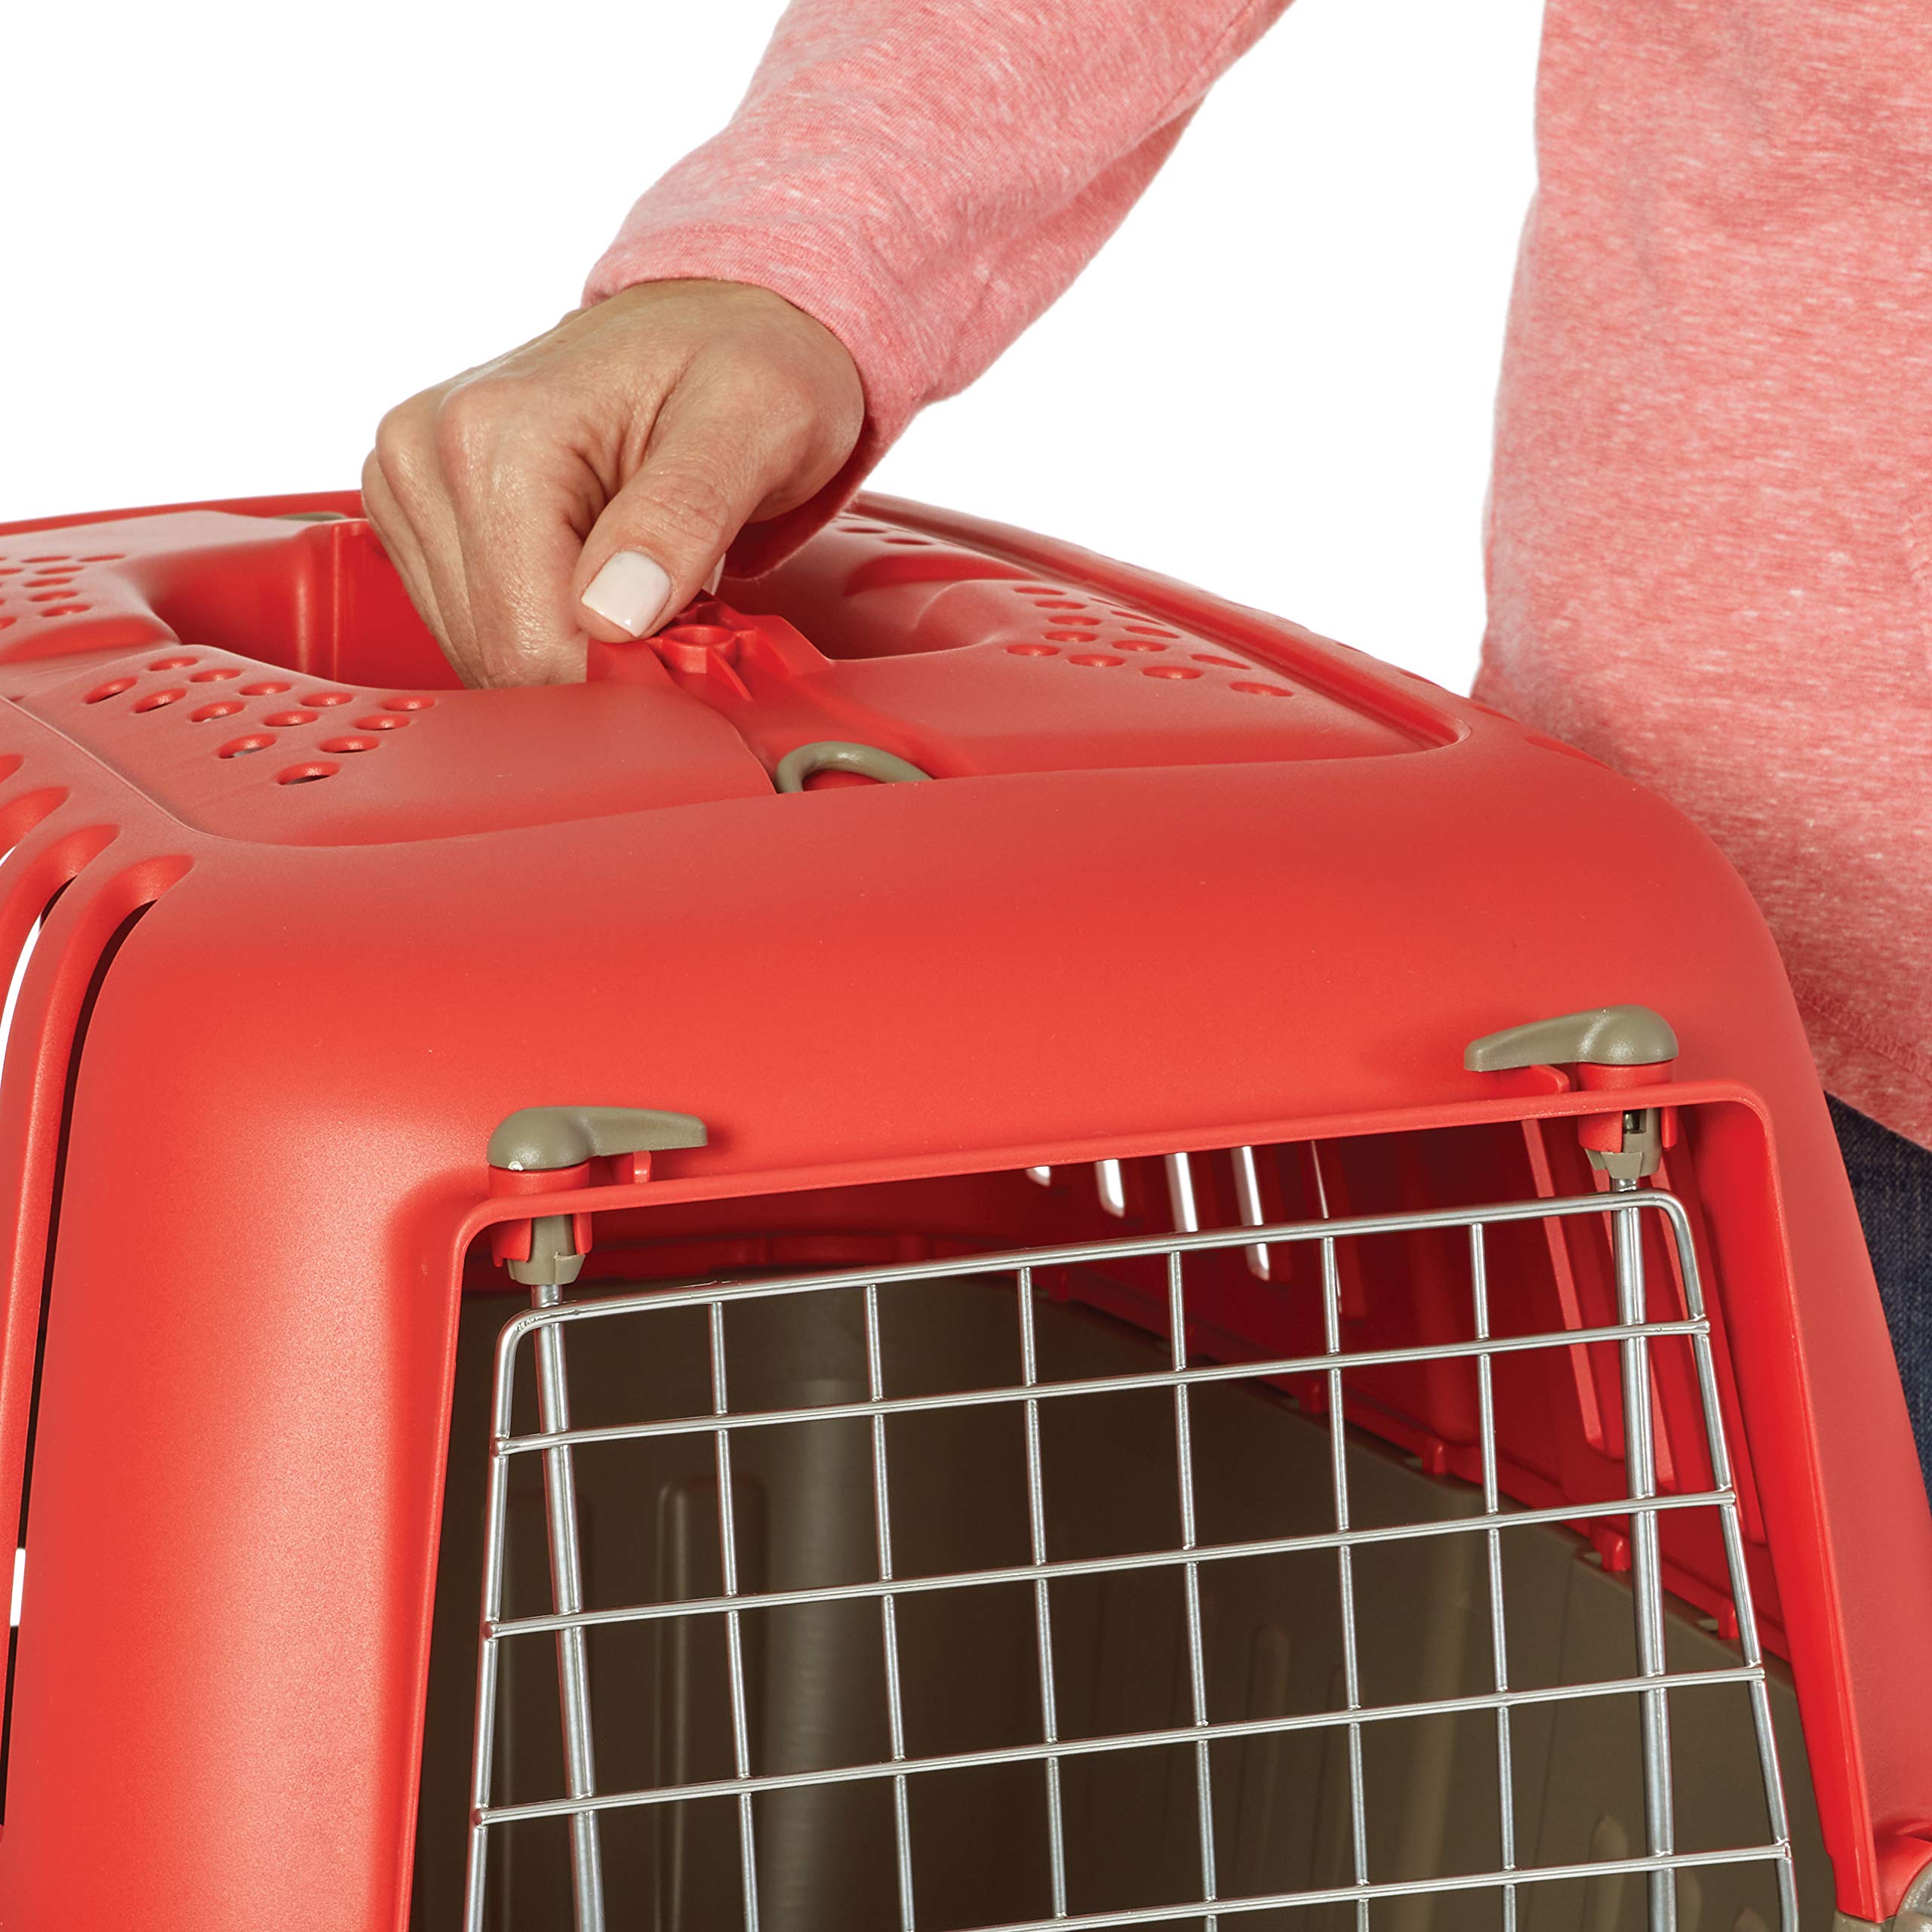 Midwest Spree Hard-Sided Travel Cat and Dog Kennel Carrier - Red - 24" X 15.5" X 15" Inches  